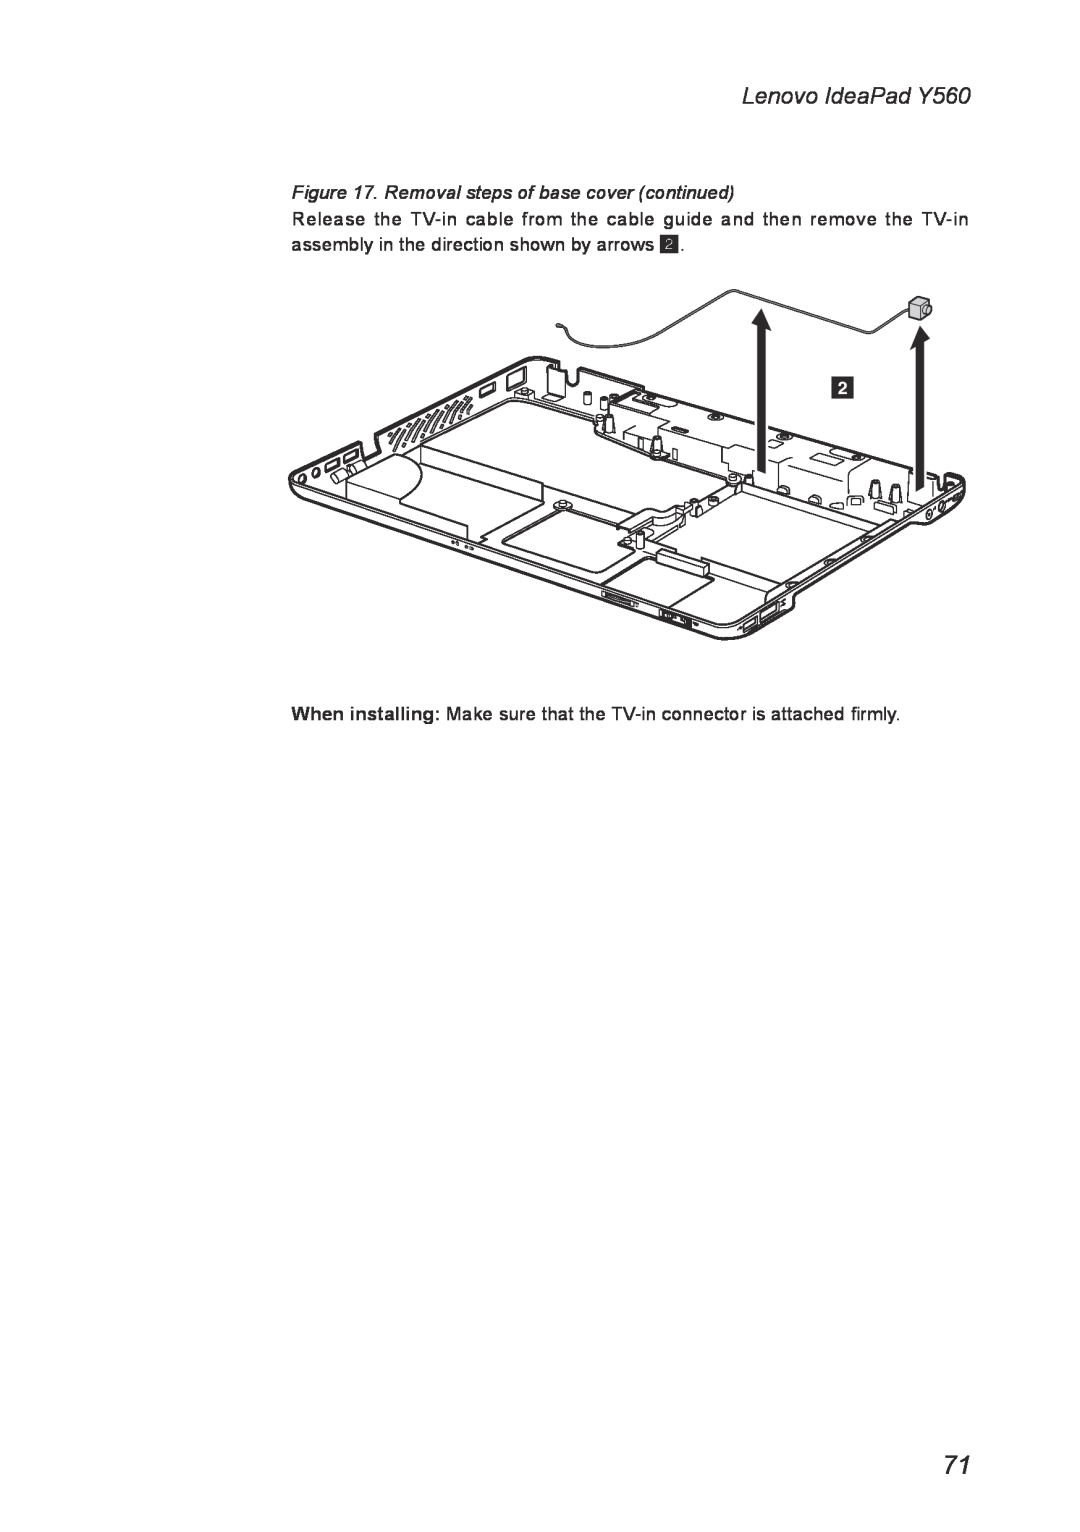 Lenovo manual Removal steps of base cover continued, Lenovo IdeaPad Y560 